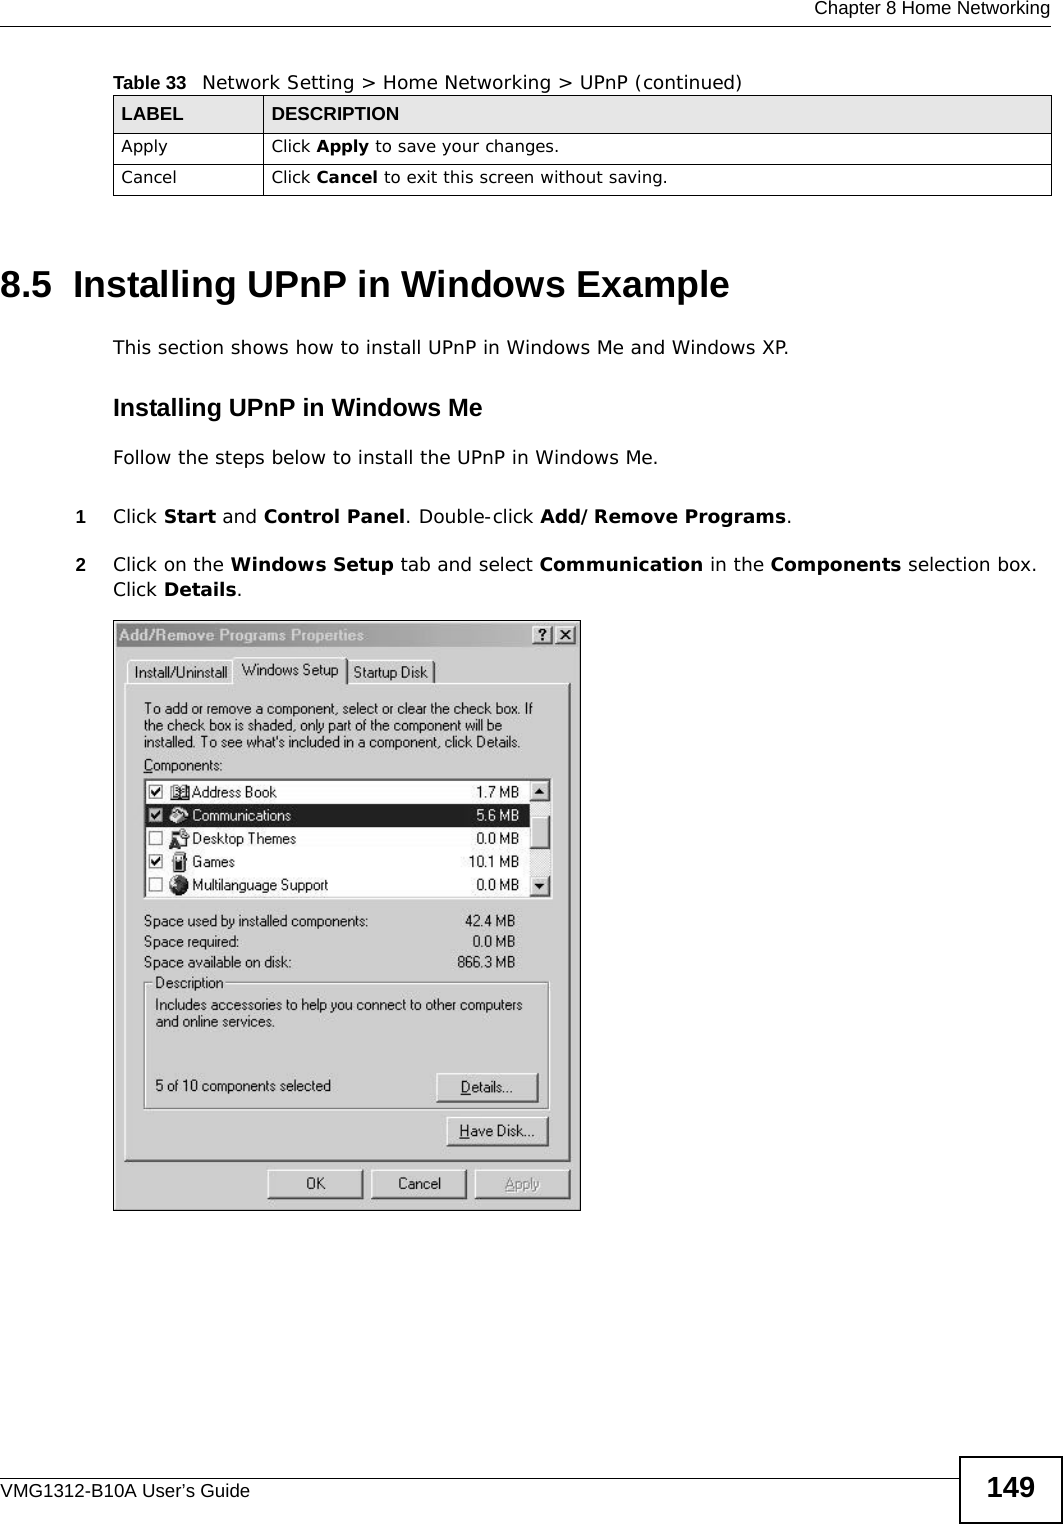  Chapter 8 Home NetworkingVMG1312-B10A User’s Guide 1498.5  Installing UPnP in Windows ExampleThis section shows how to install UPnP in Windows Me and Windows XP. Installing UPnP in Windows MeFollow the steps below to install the UPnP in Windows Me. 1Click Start and Control Panel. Double-click Add/Remove Programs.2Click on the Windows Setup tab and select Communication in the Components selection box. Click Details. Add/Remove Programs: Windows Setup: Communication Apply Click Apply to save your changes.Cancel Click Cancel to exit this screen without saving.Table 33   Network Setting &gt; Home Networking &gt; UPnP (continued)LABEL DESCRIPTION